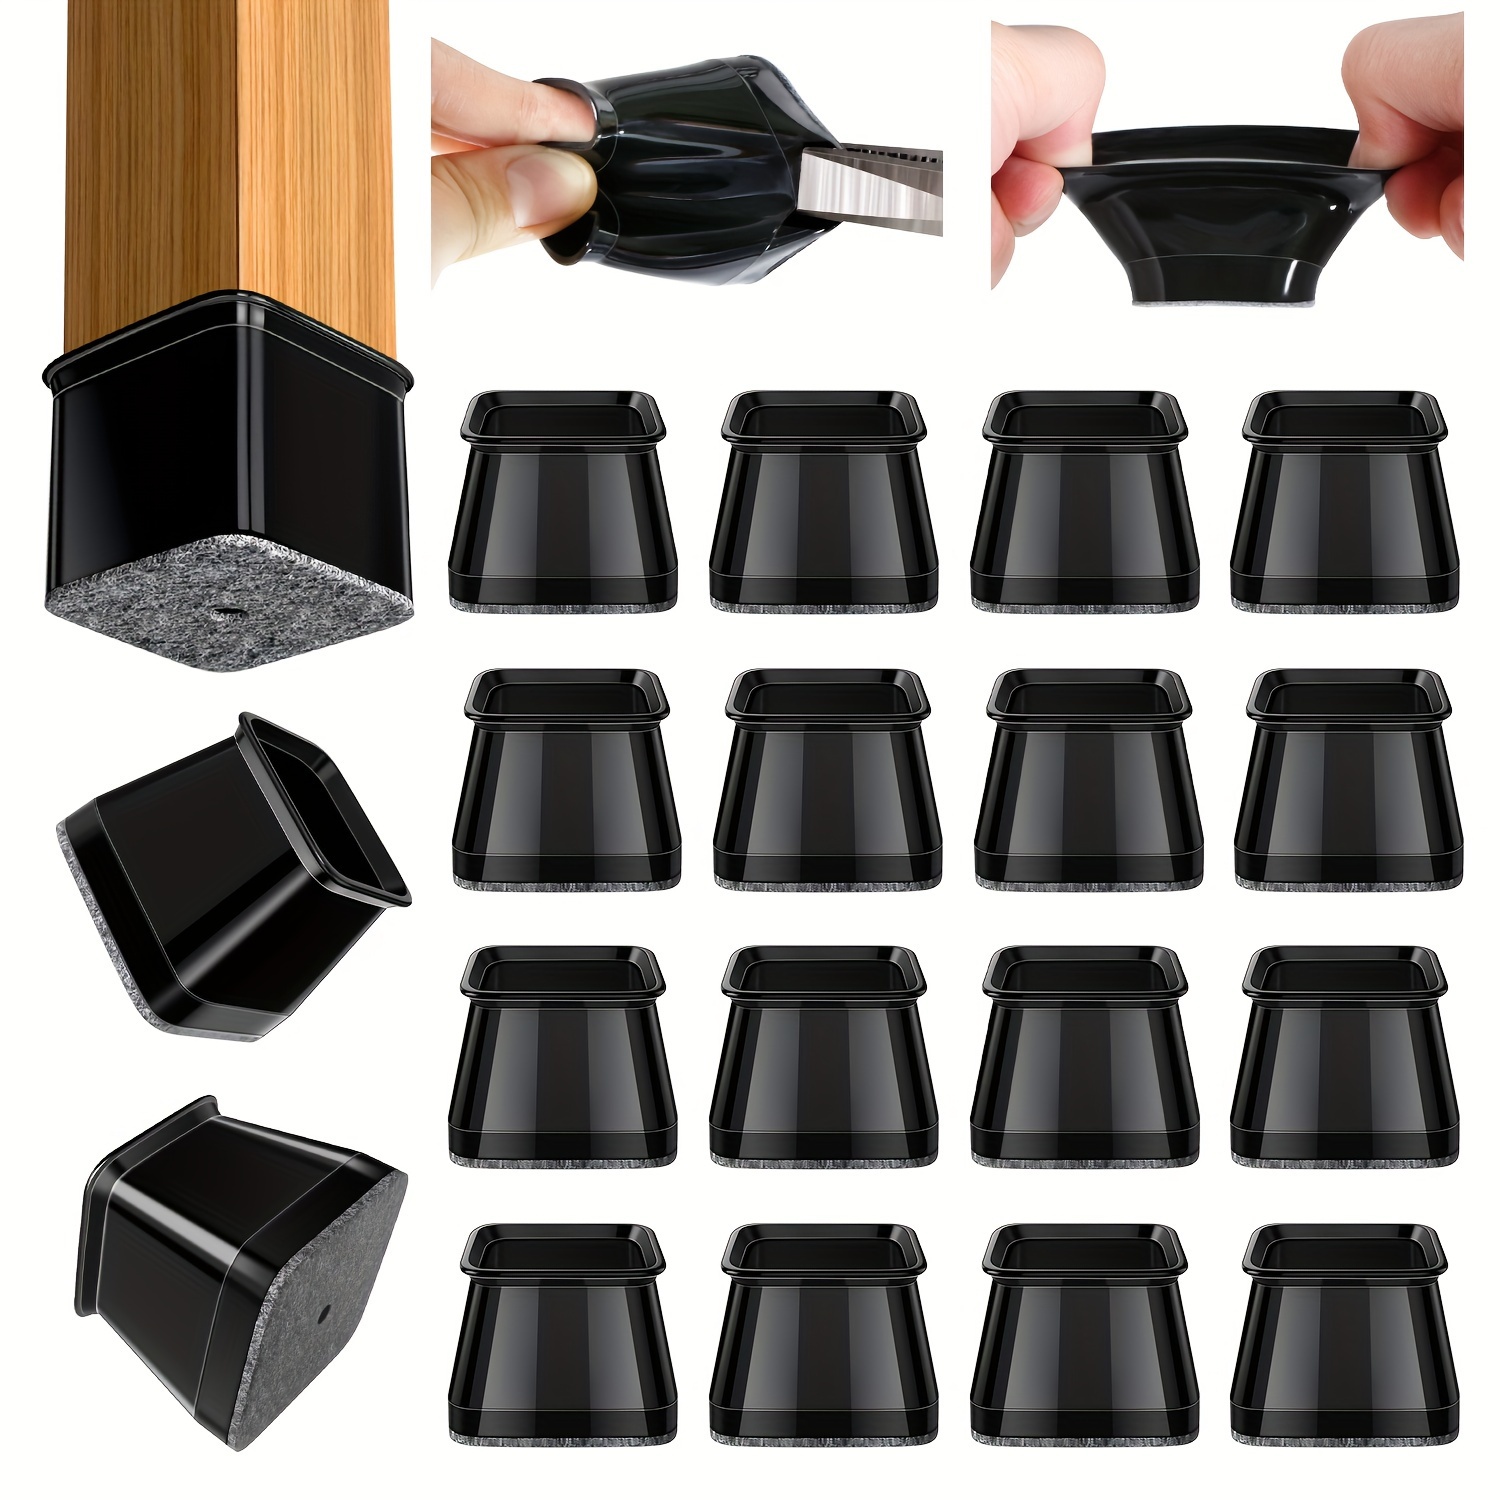 

20-piece Premium Black Chair Leg Protectors For Hardwood Floors - Polished Metal Finish, Durable Furniture Feet Covers With Felt Pads & Rubber Caps, 4 Sizes Available